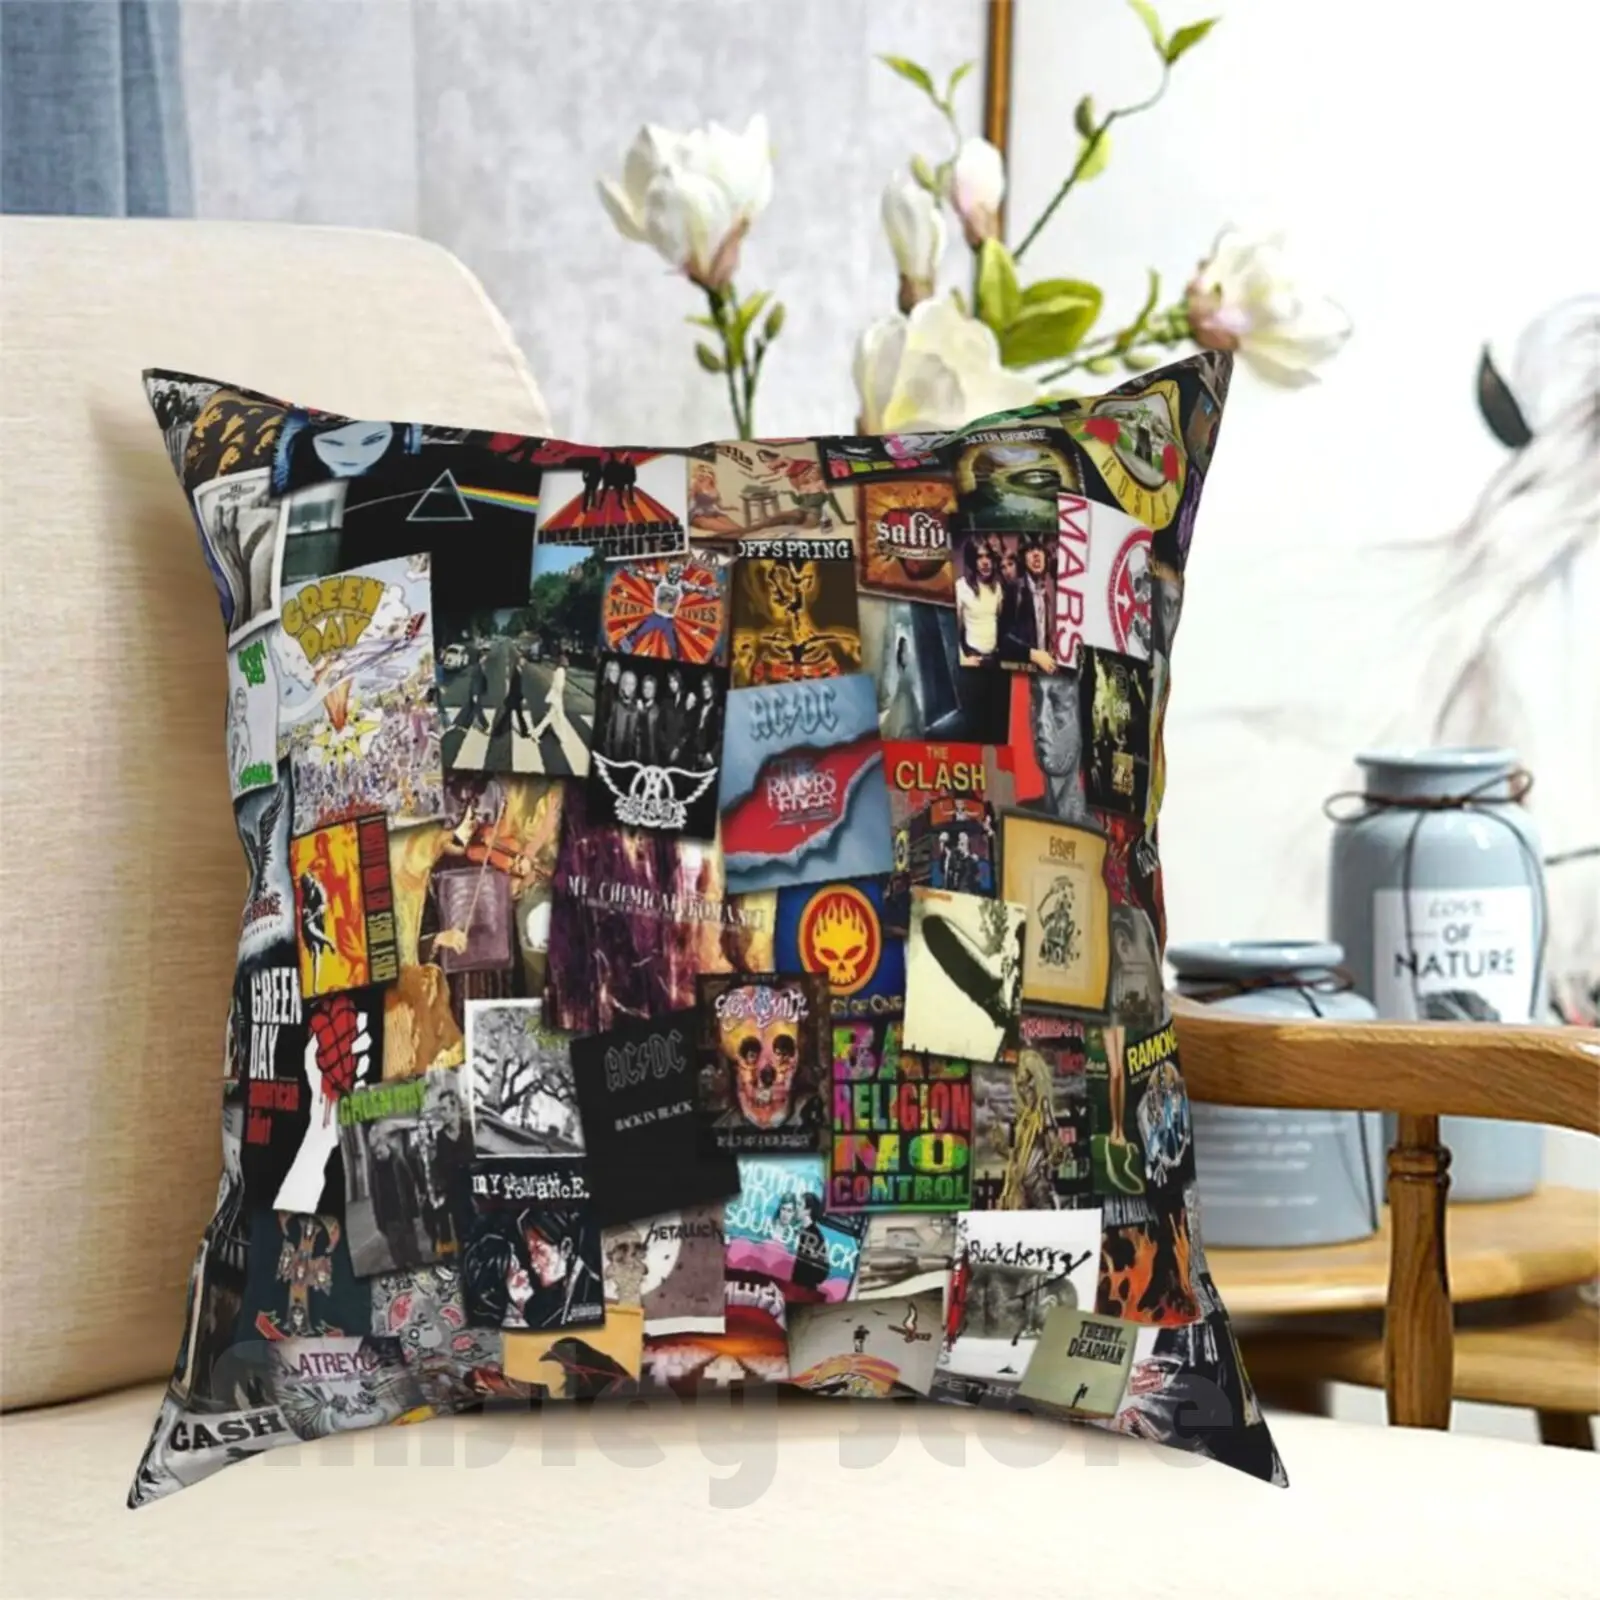 

In One Place Pillow Case Printed Home Soft DIY Pillow cover Music Album Band Bands Collage Mix